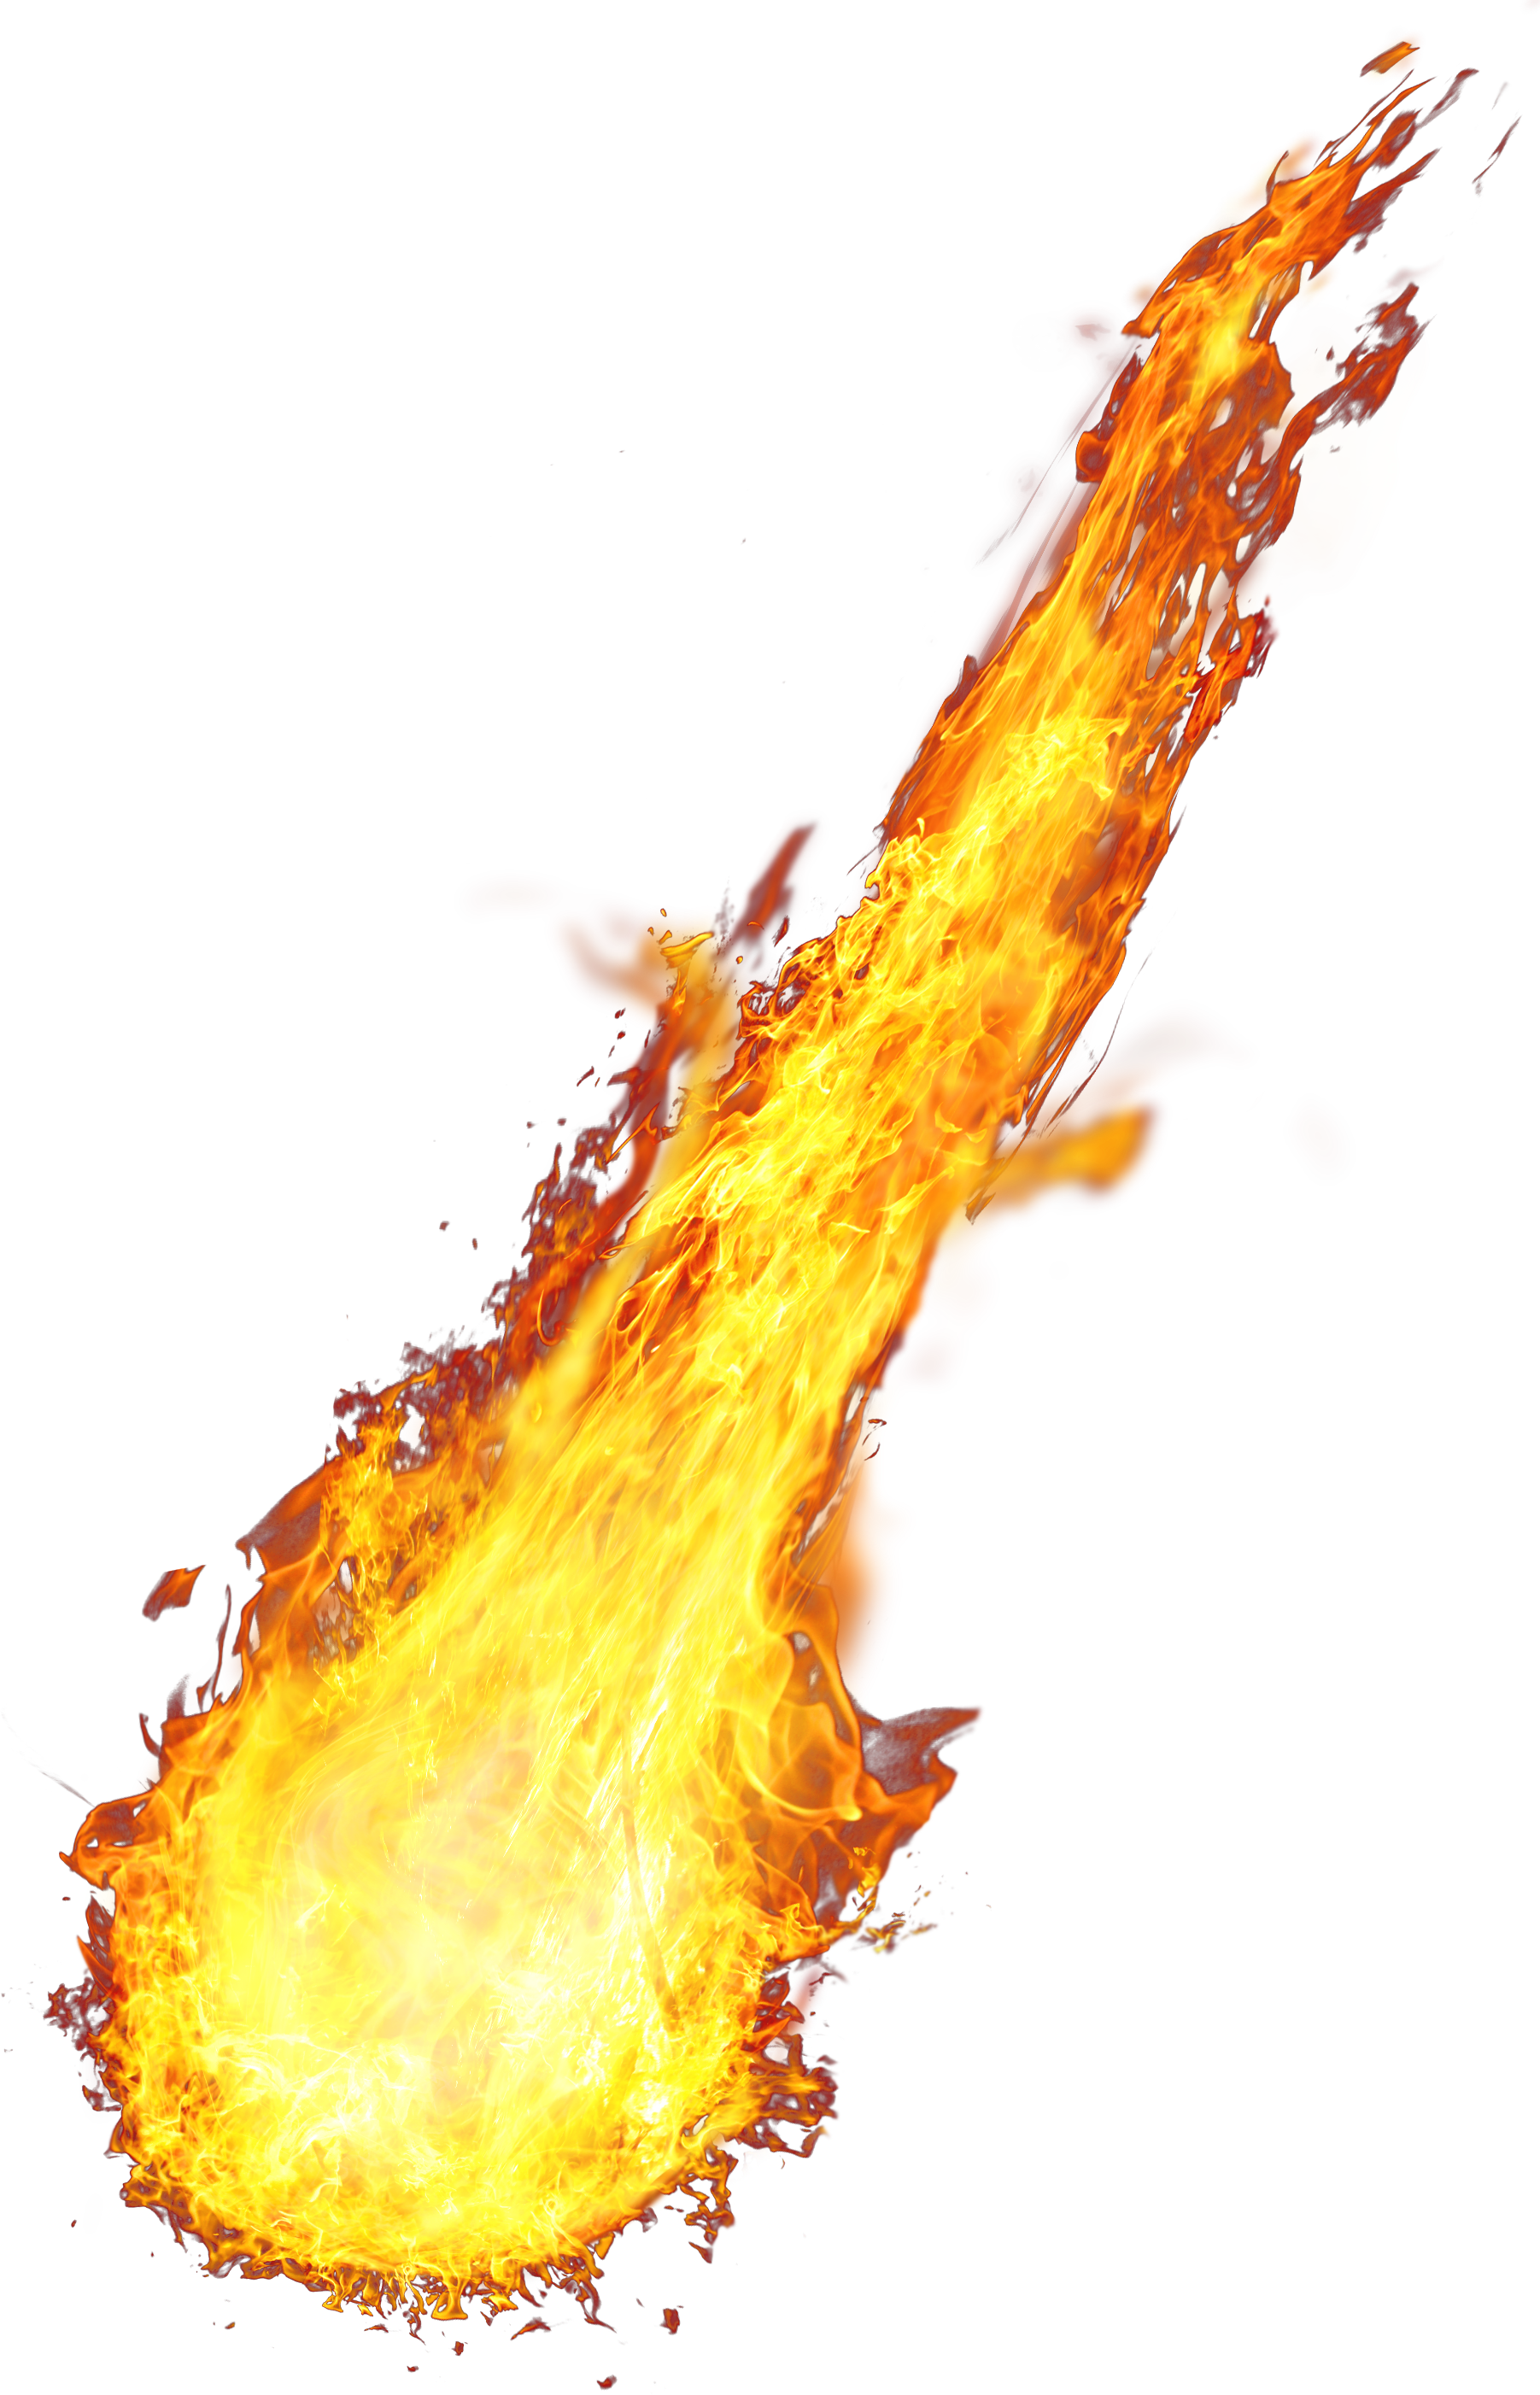 fire flame ball image png download #8141